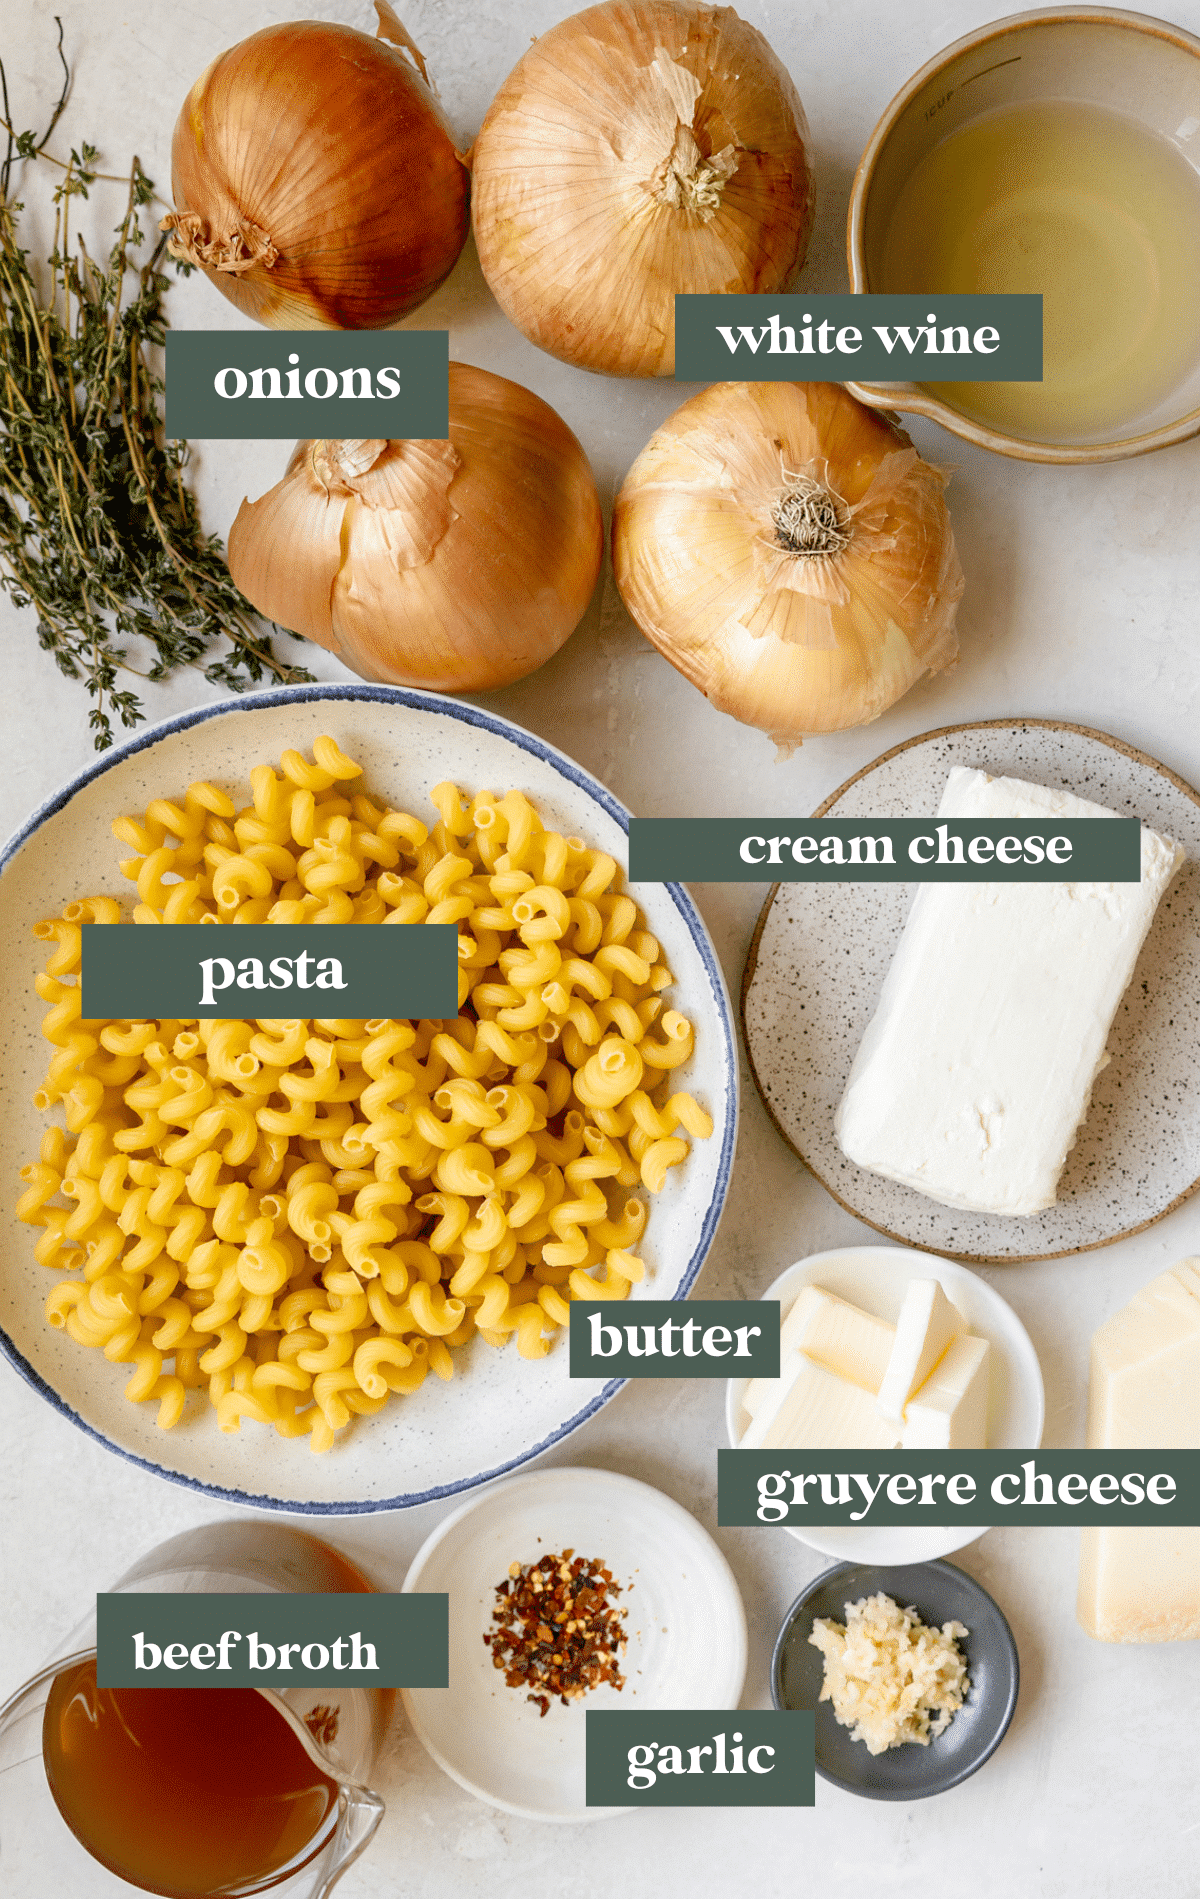 ingredients needed to make a pasta dish.